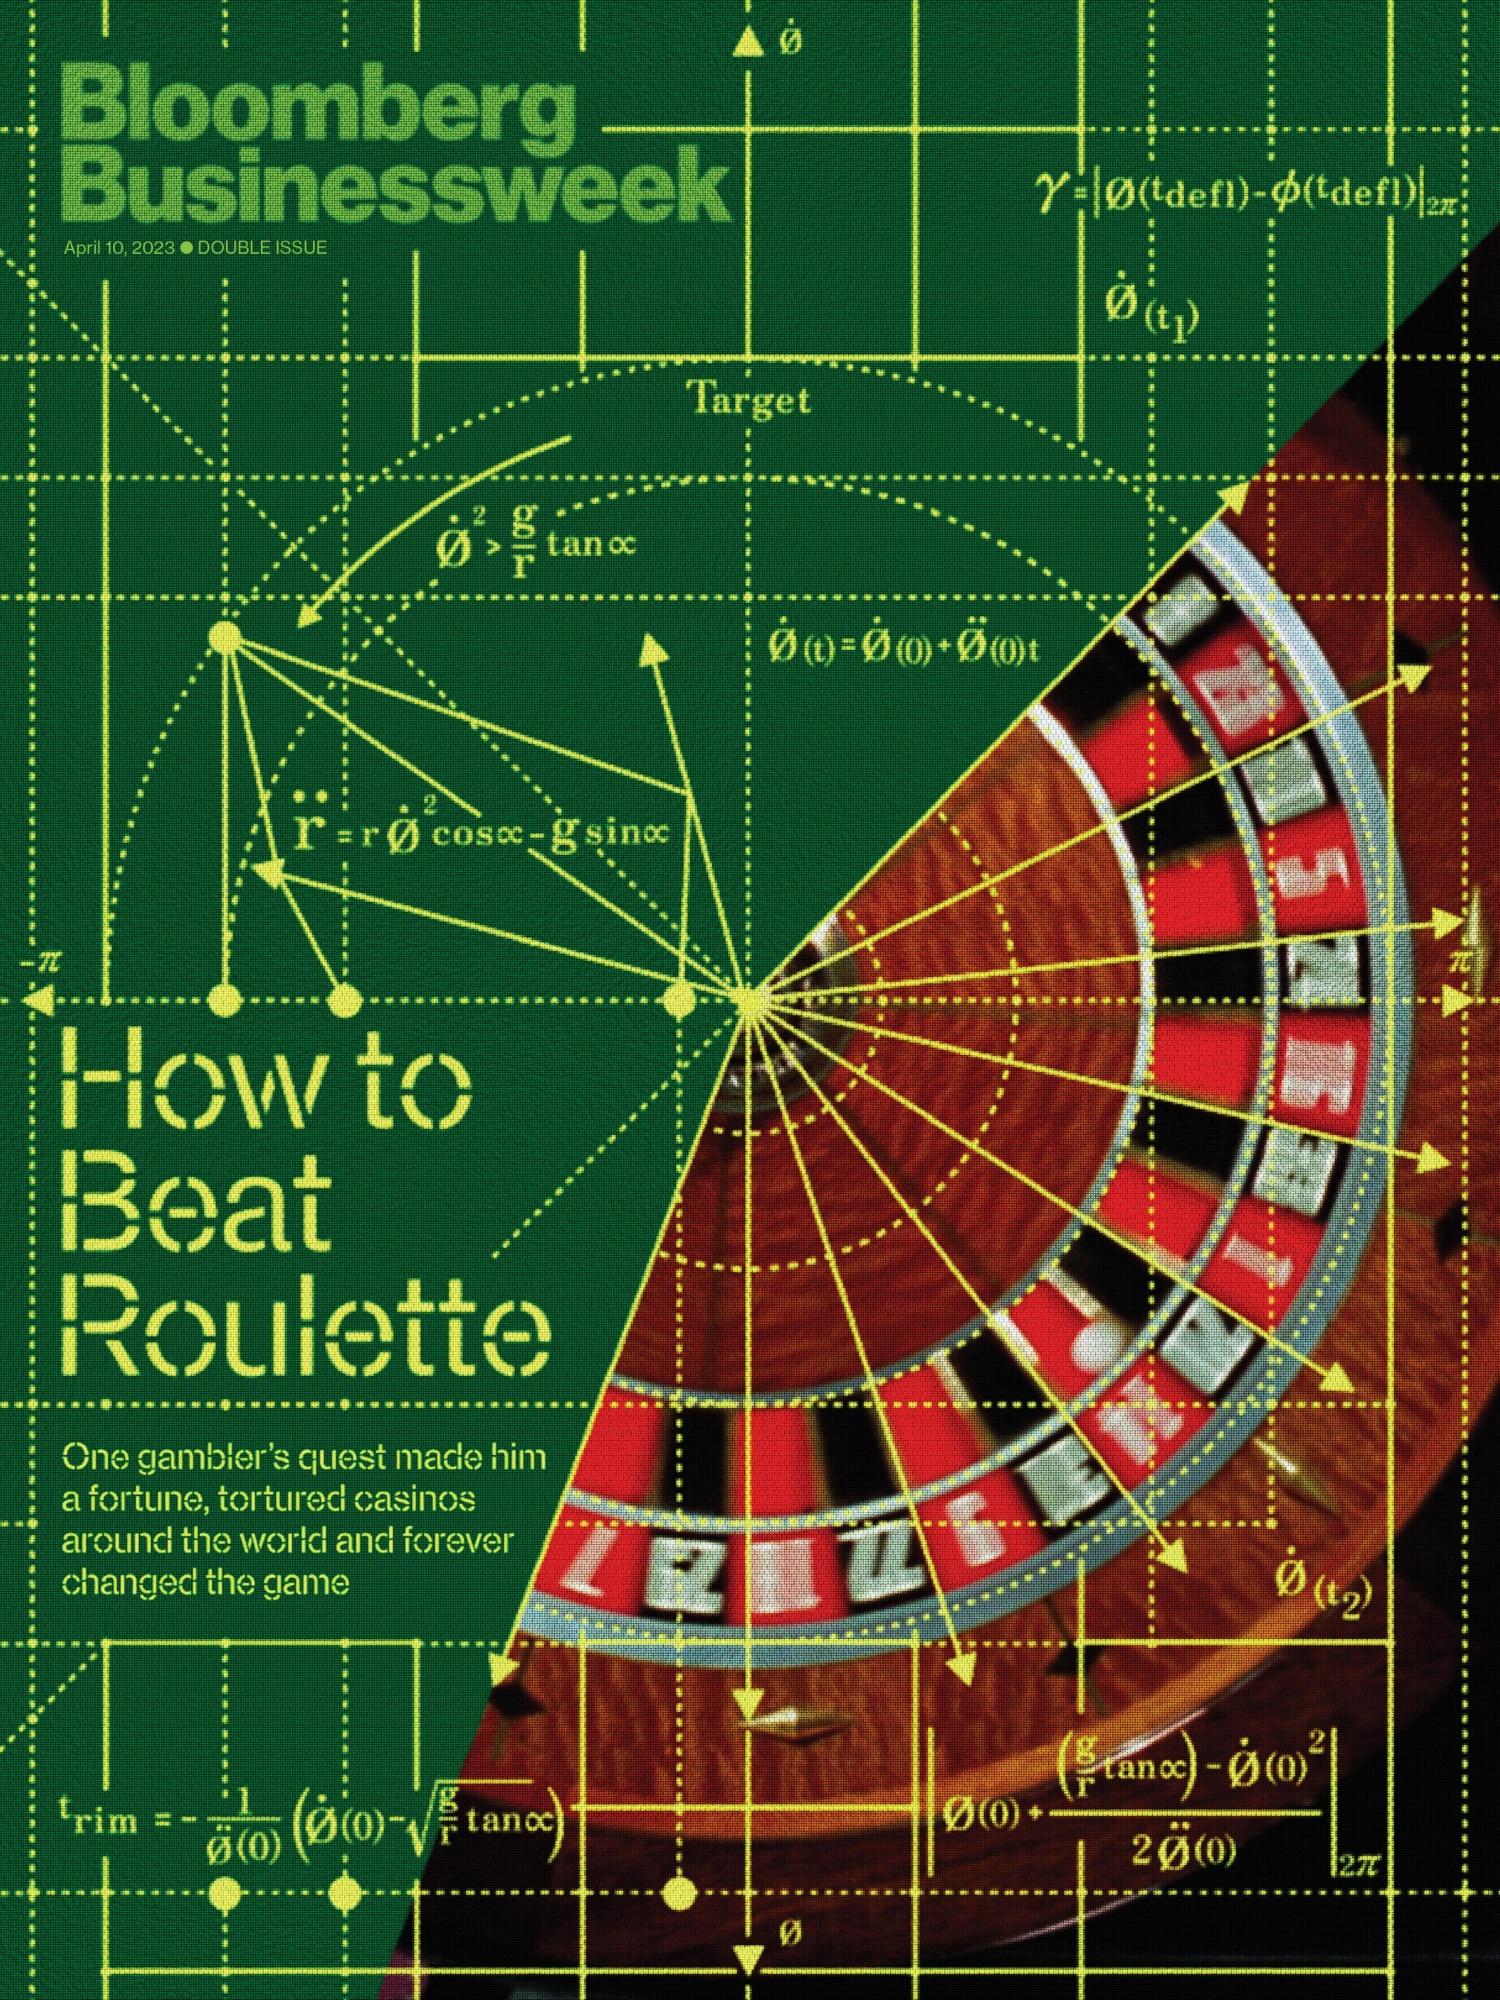 A MUST-READ: The Man Who Beat The Roulette Wheel 